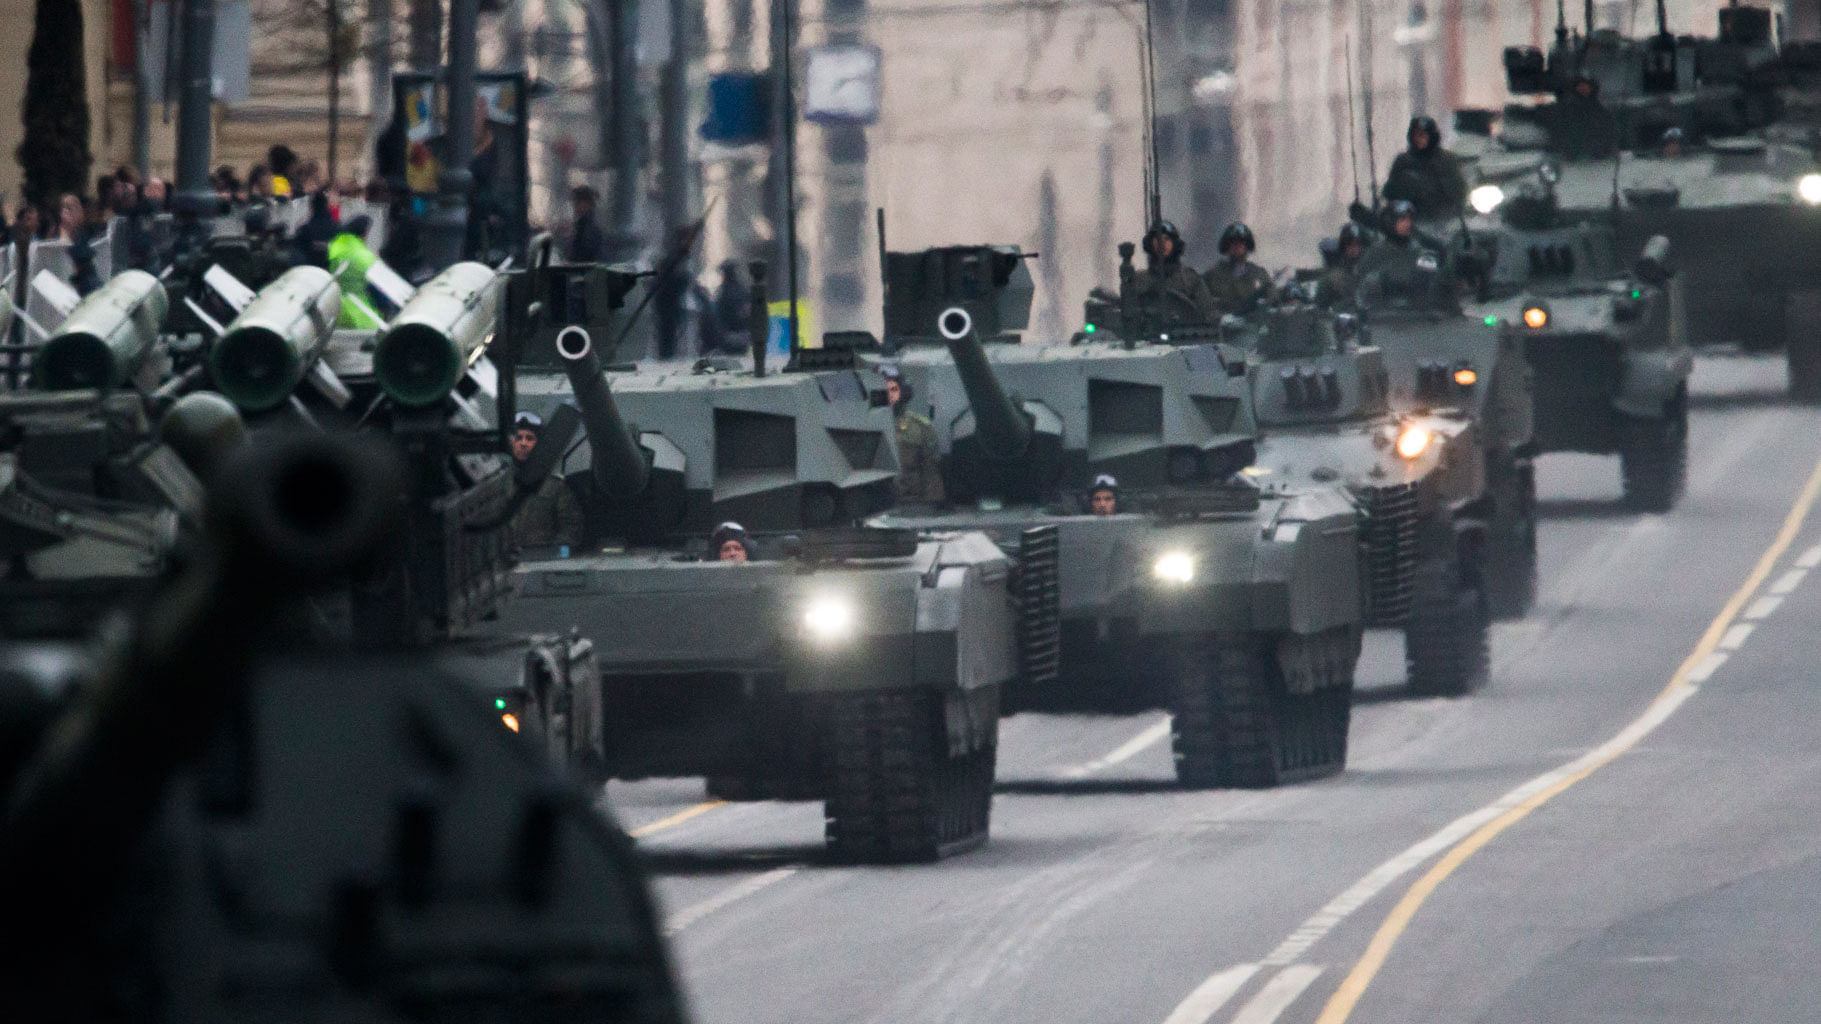  Russian T-14 Armata tanks makes its way to Red Square during a rehearsal for the Victory Day military parade. (Photo: AP) 